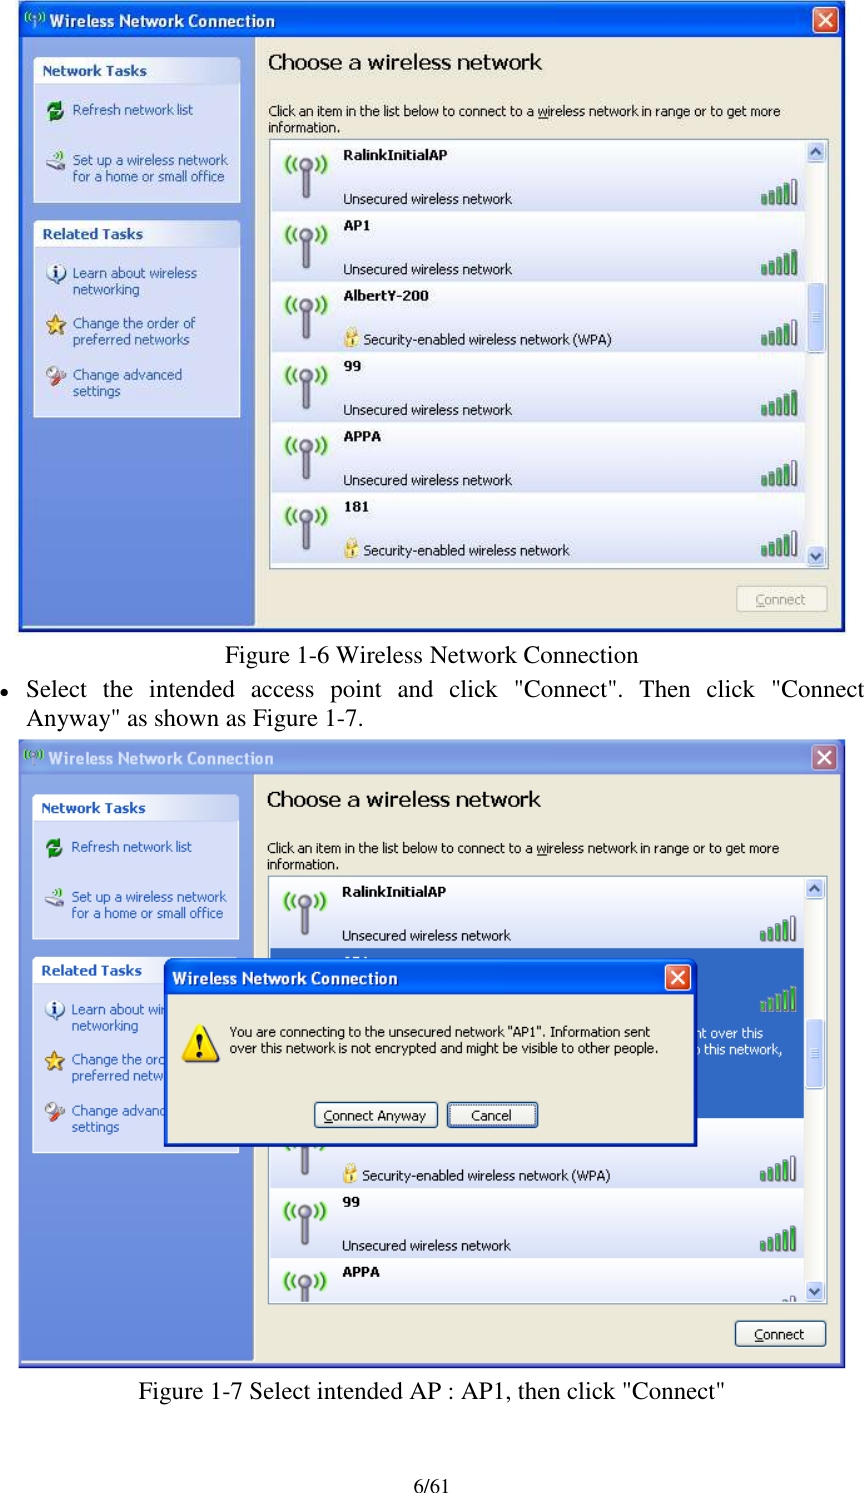 6/61Figure 1-6 Wireless Network ConnectionSelect the intended access point and click &quot;Connect&quot;. Then click &quot;ConnectAnyway&quot; as shown as Figure 1-7.Figure 1-7 Select intended AP : AP1, then click &quot;Connect&quot;